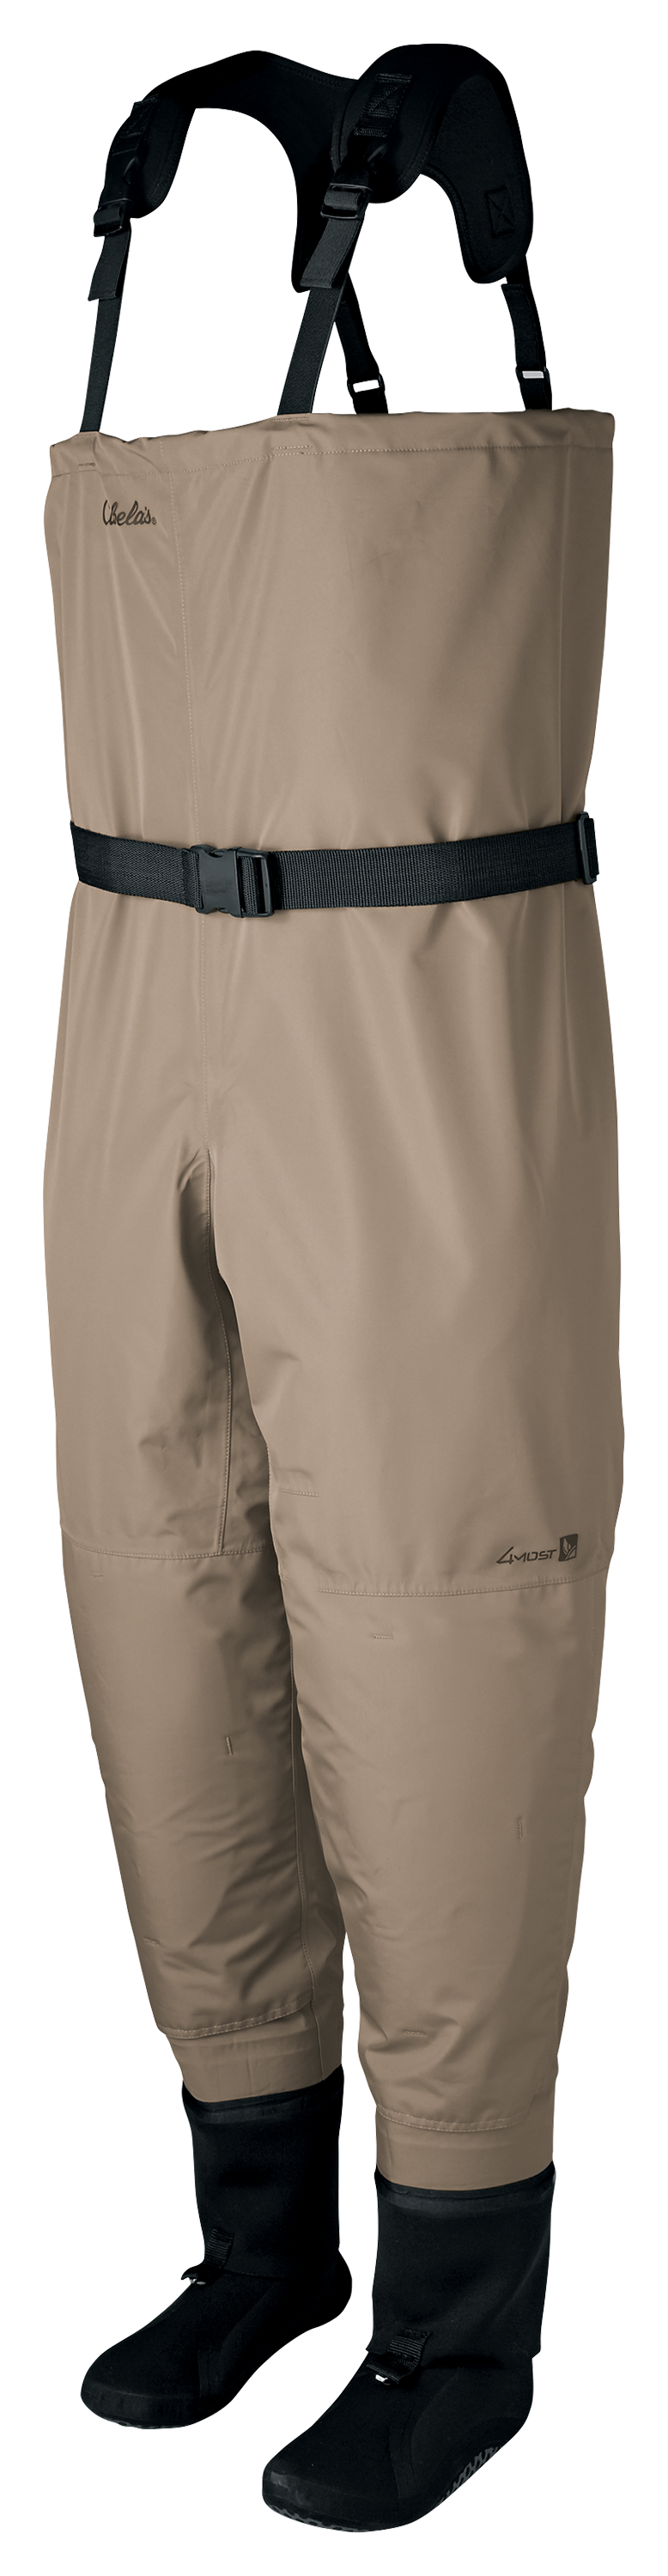 Waders HYDROX Évolution Stocking - Souples & confortables